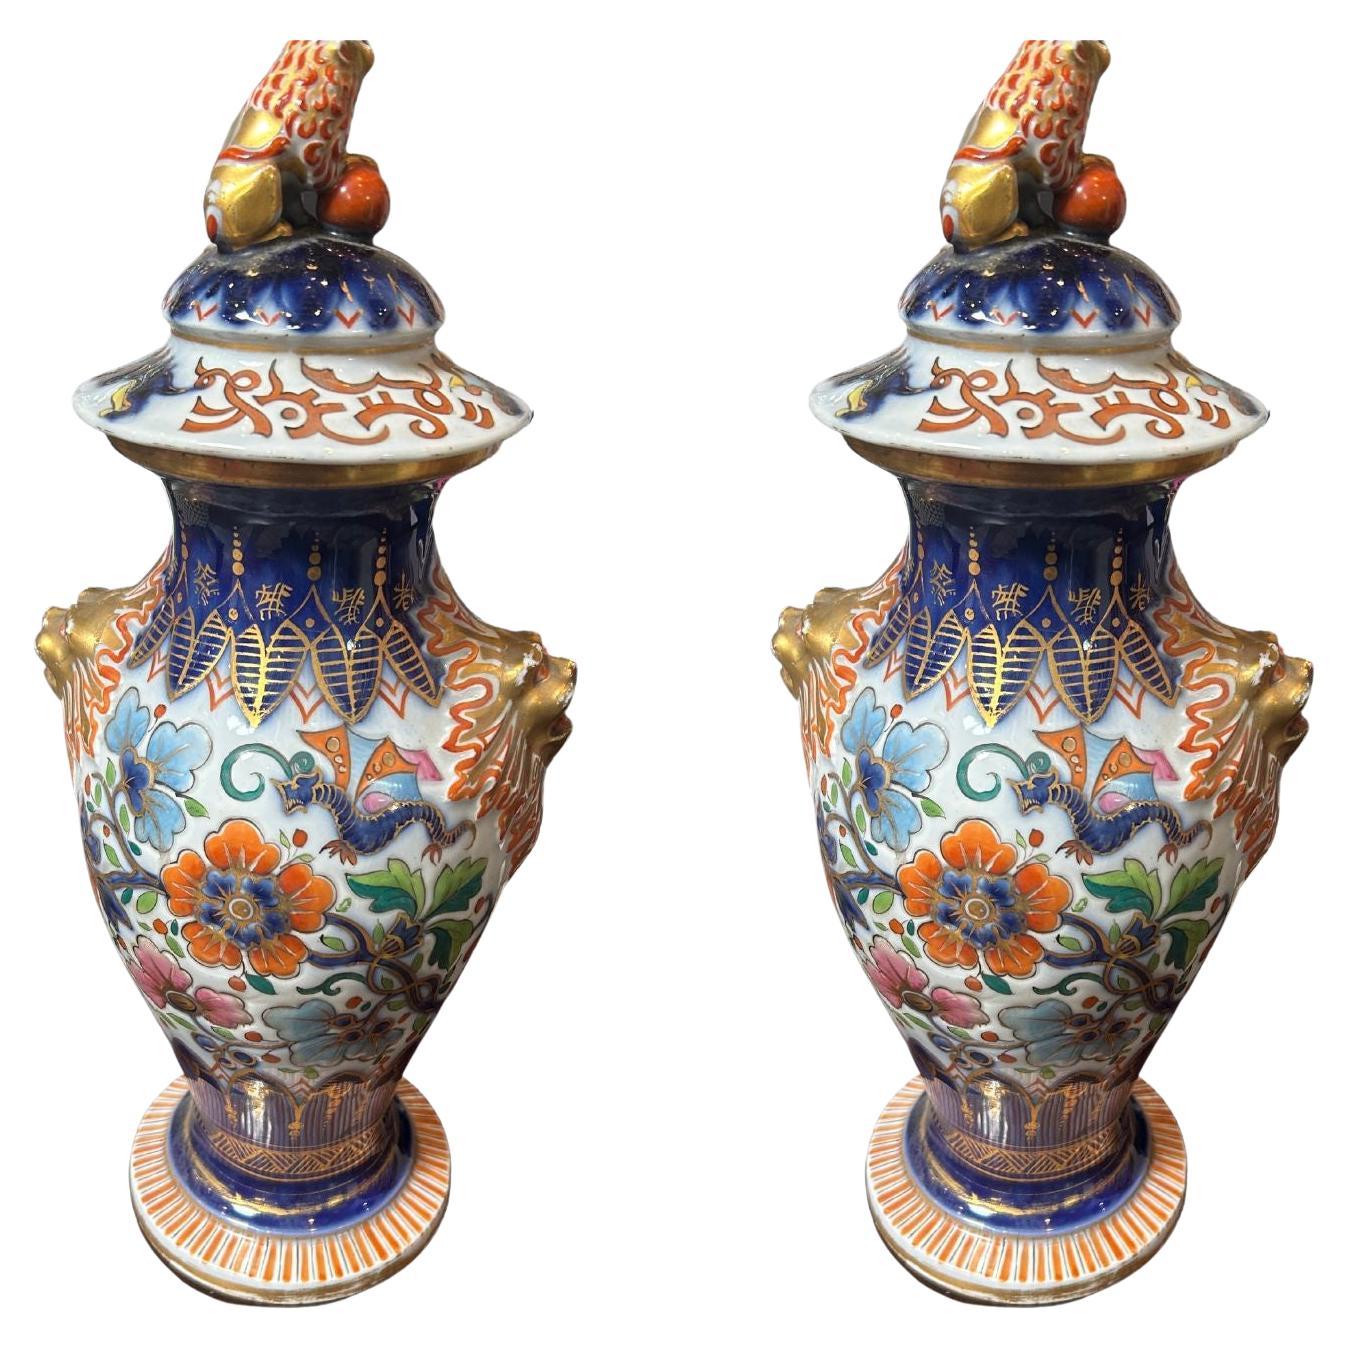 19th Century Painted Chinese Export Clobbered Ware For Sale